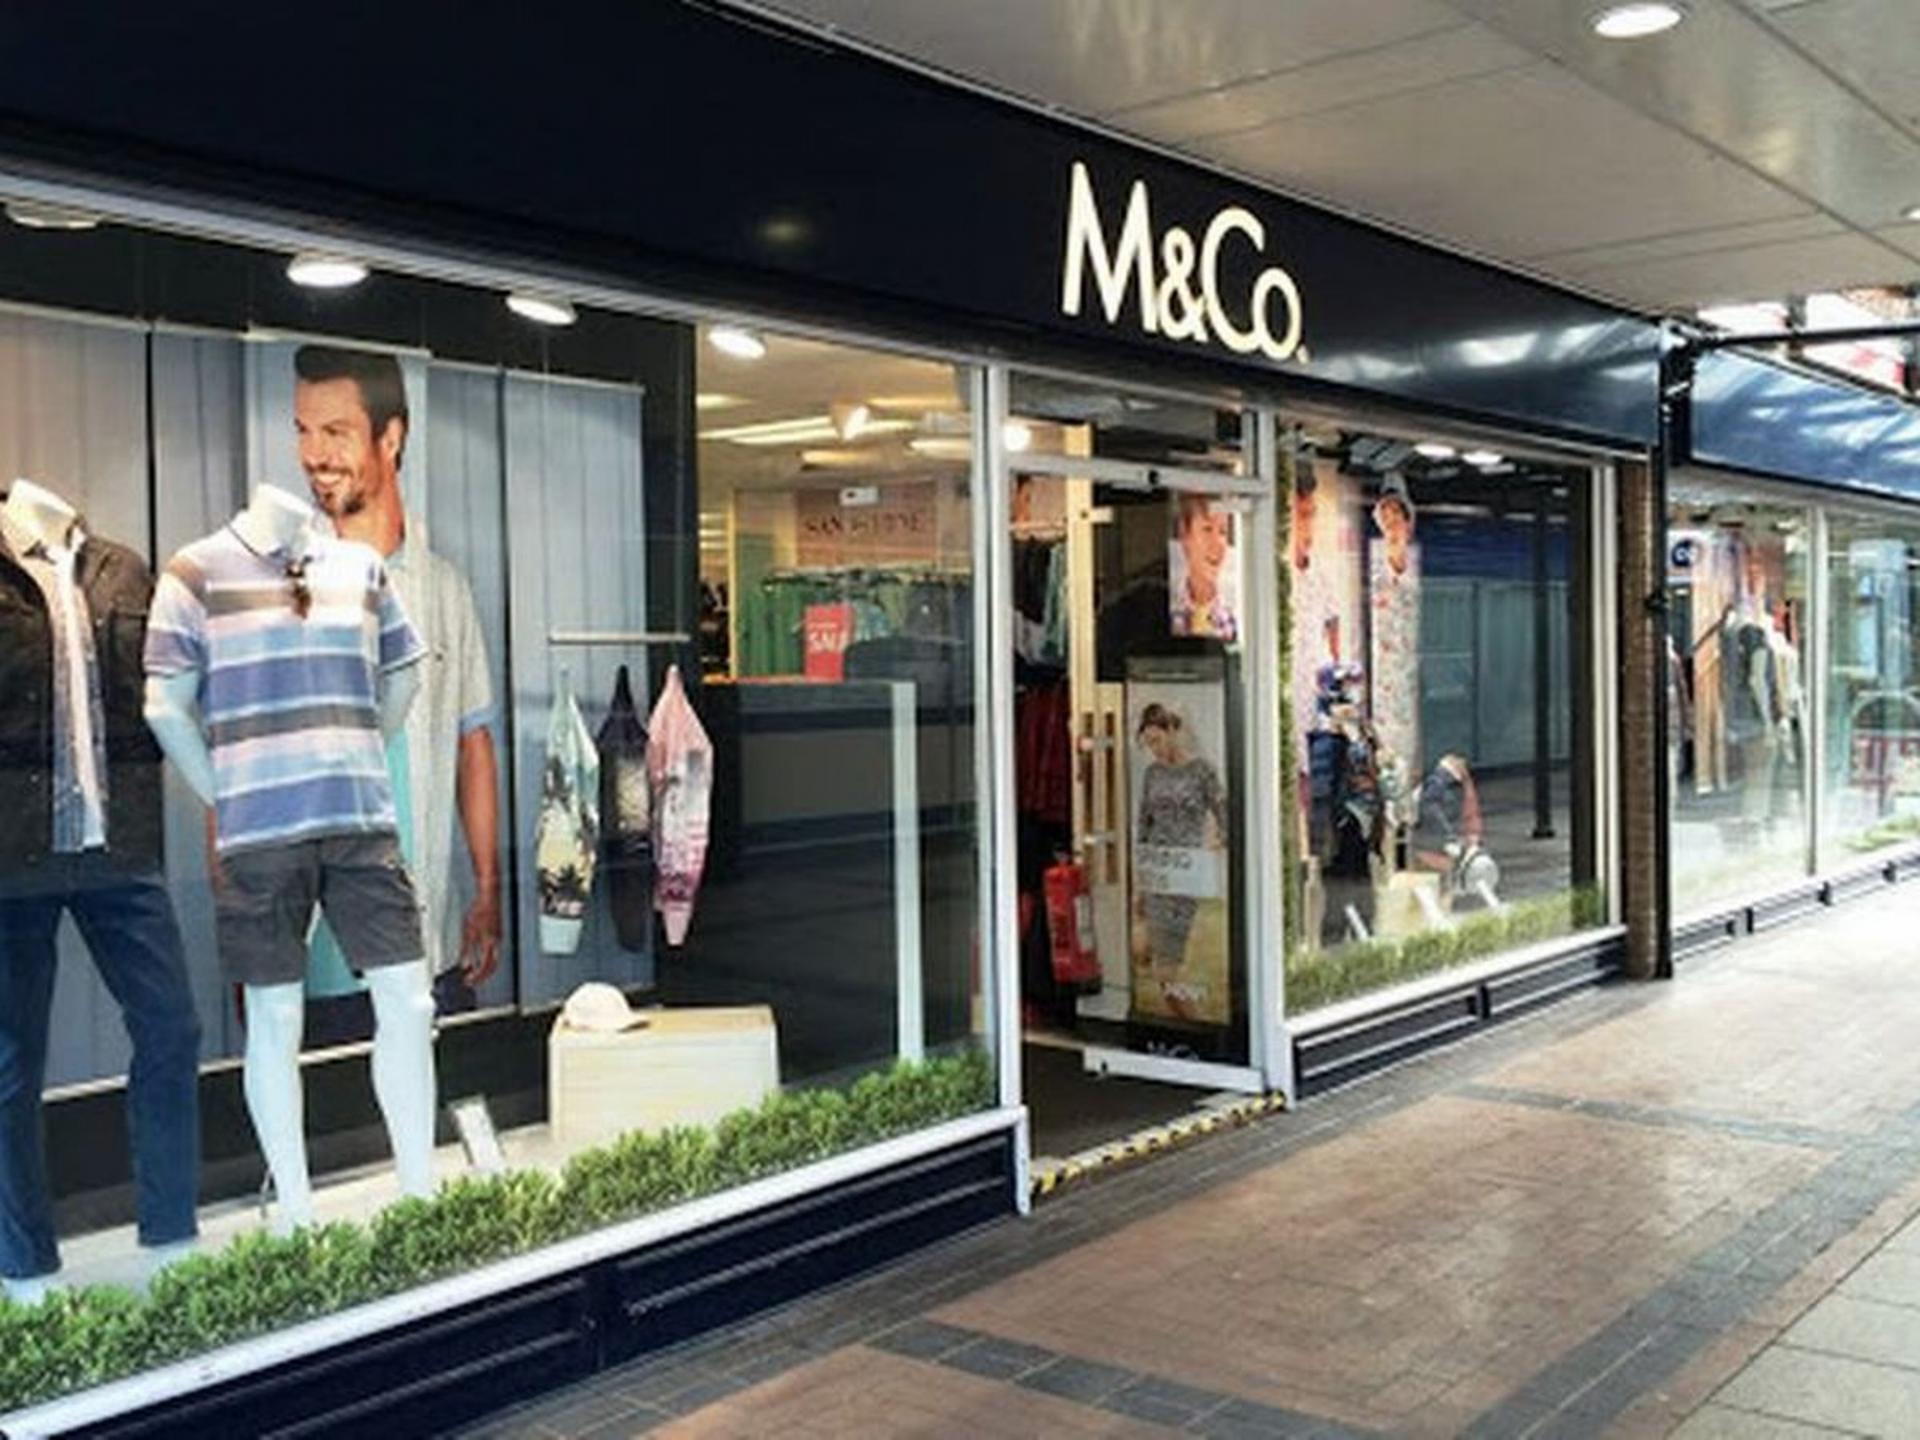 High street retailer M&Co seeks buyer after entering administration again